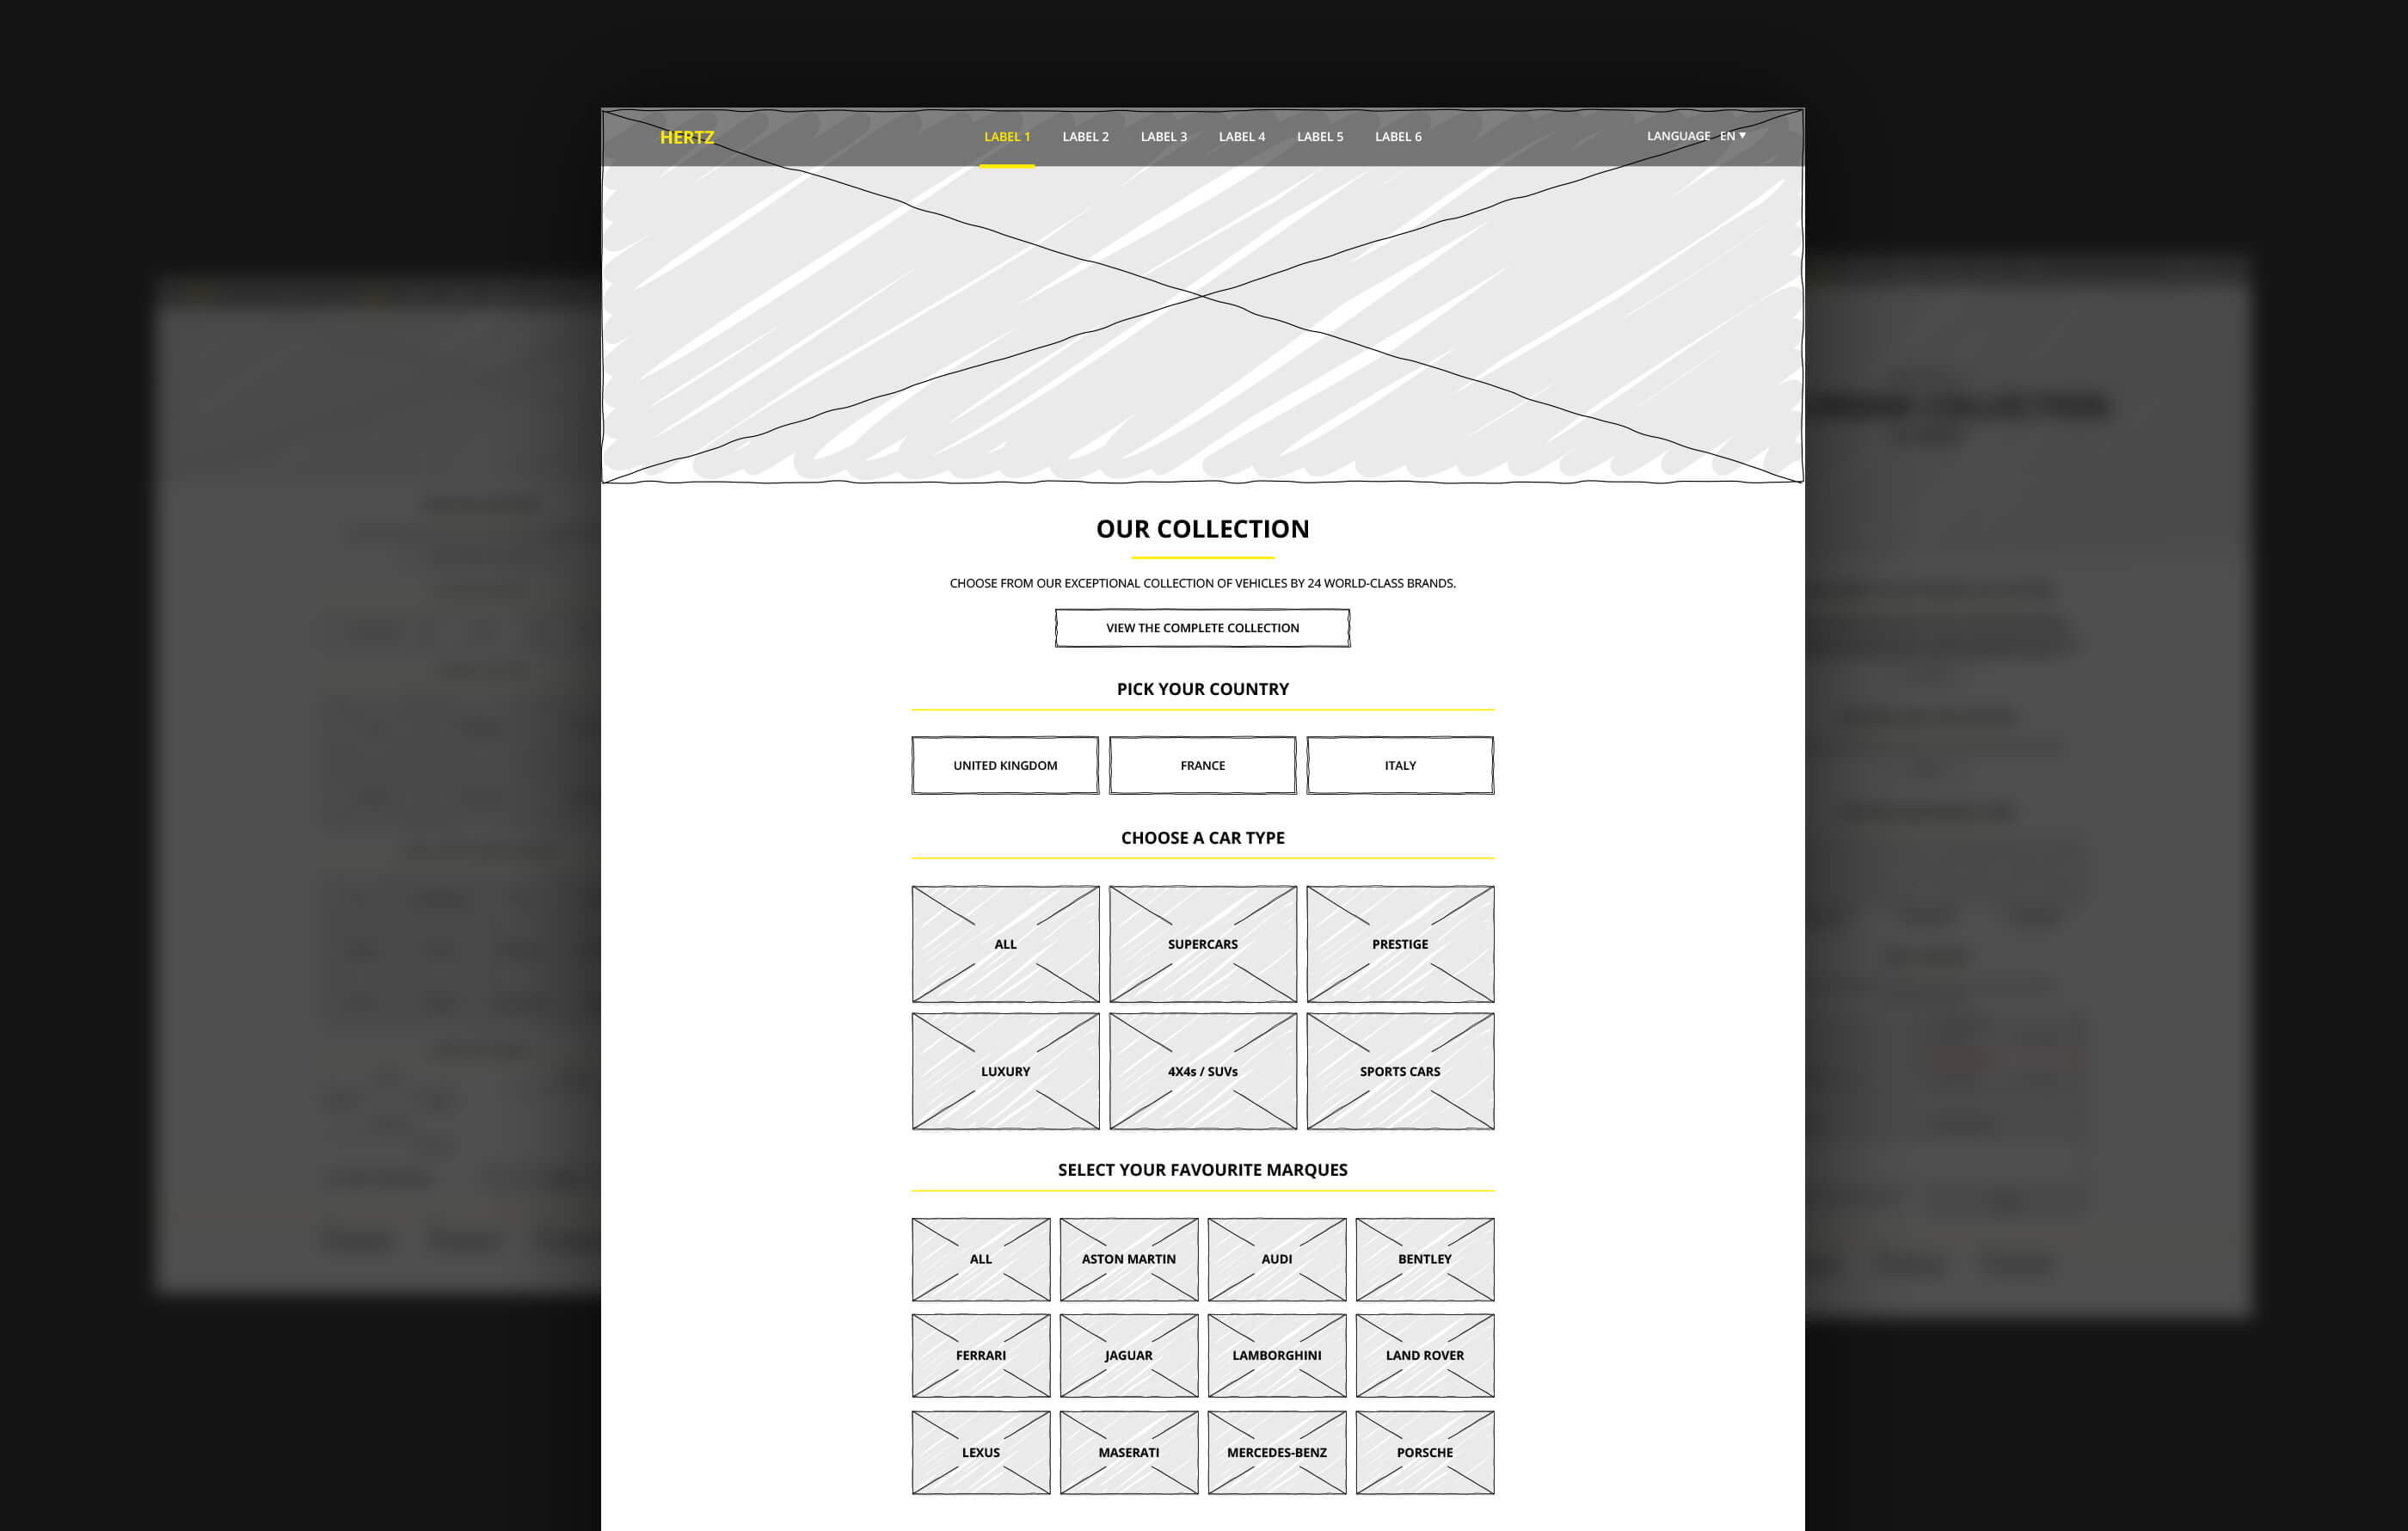 Hand drawn wireframe of the homepage showcasing country, car type and marque search filters, in black and white with yellow accents on a black background